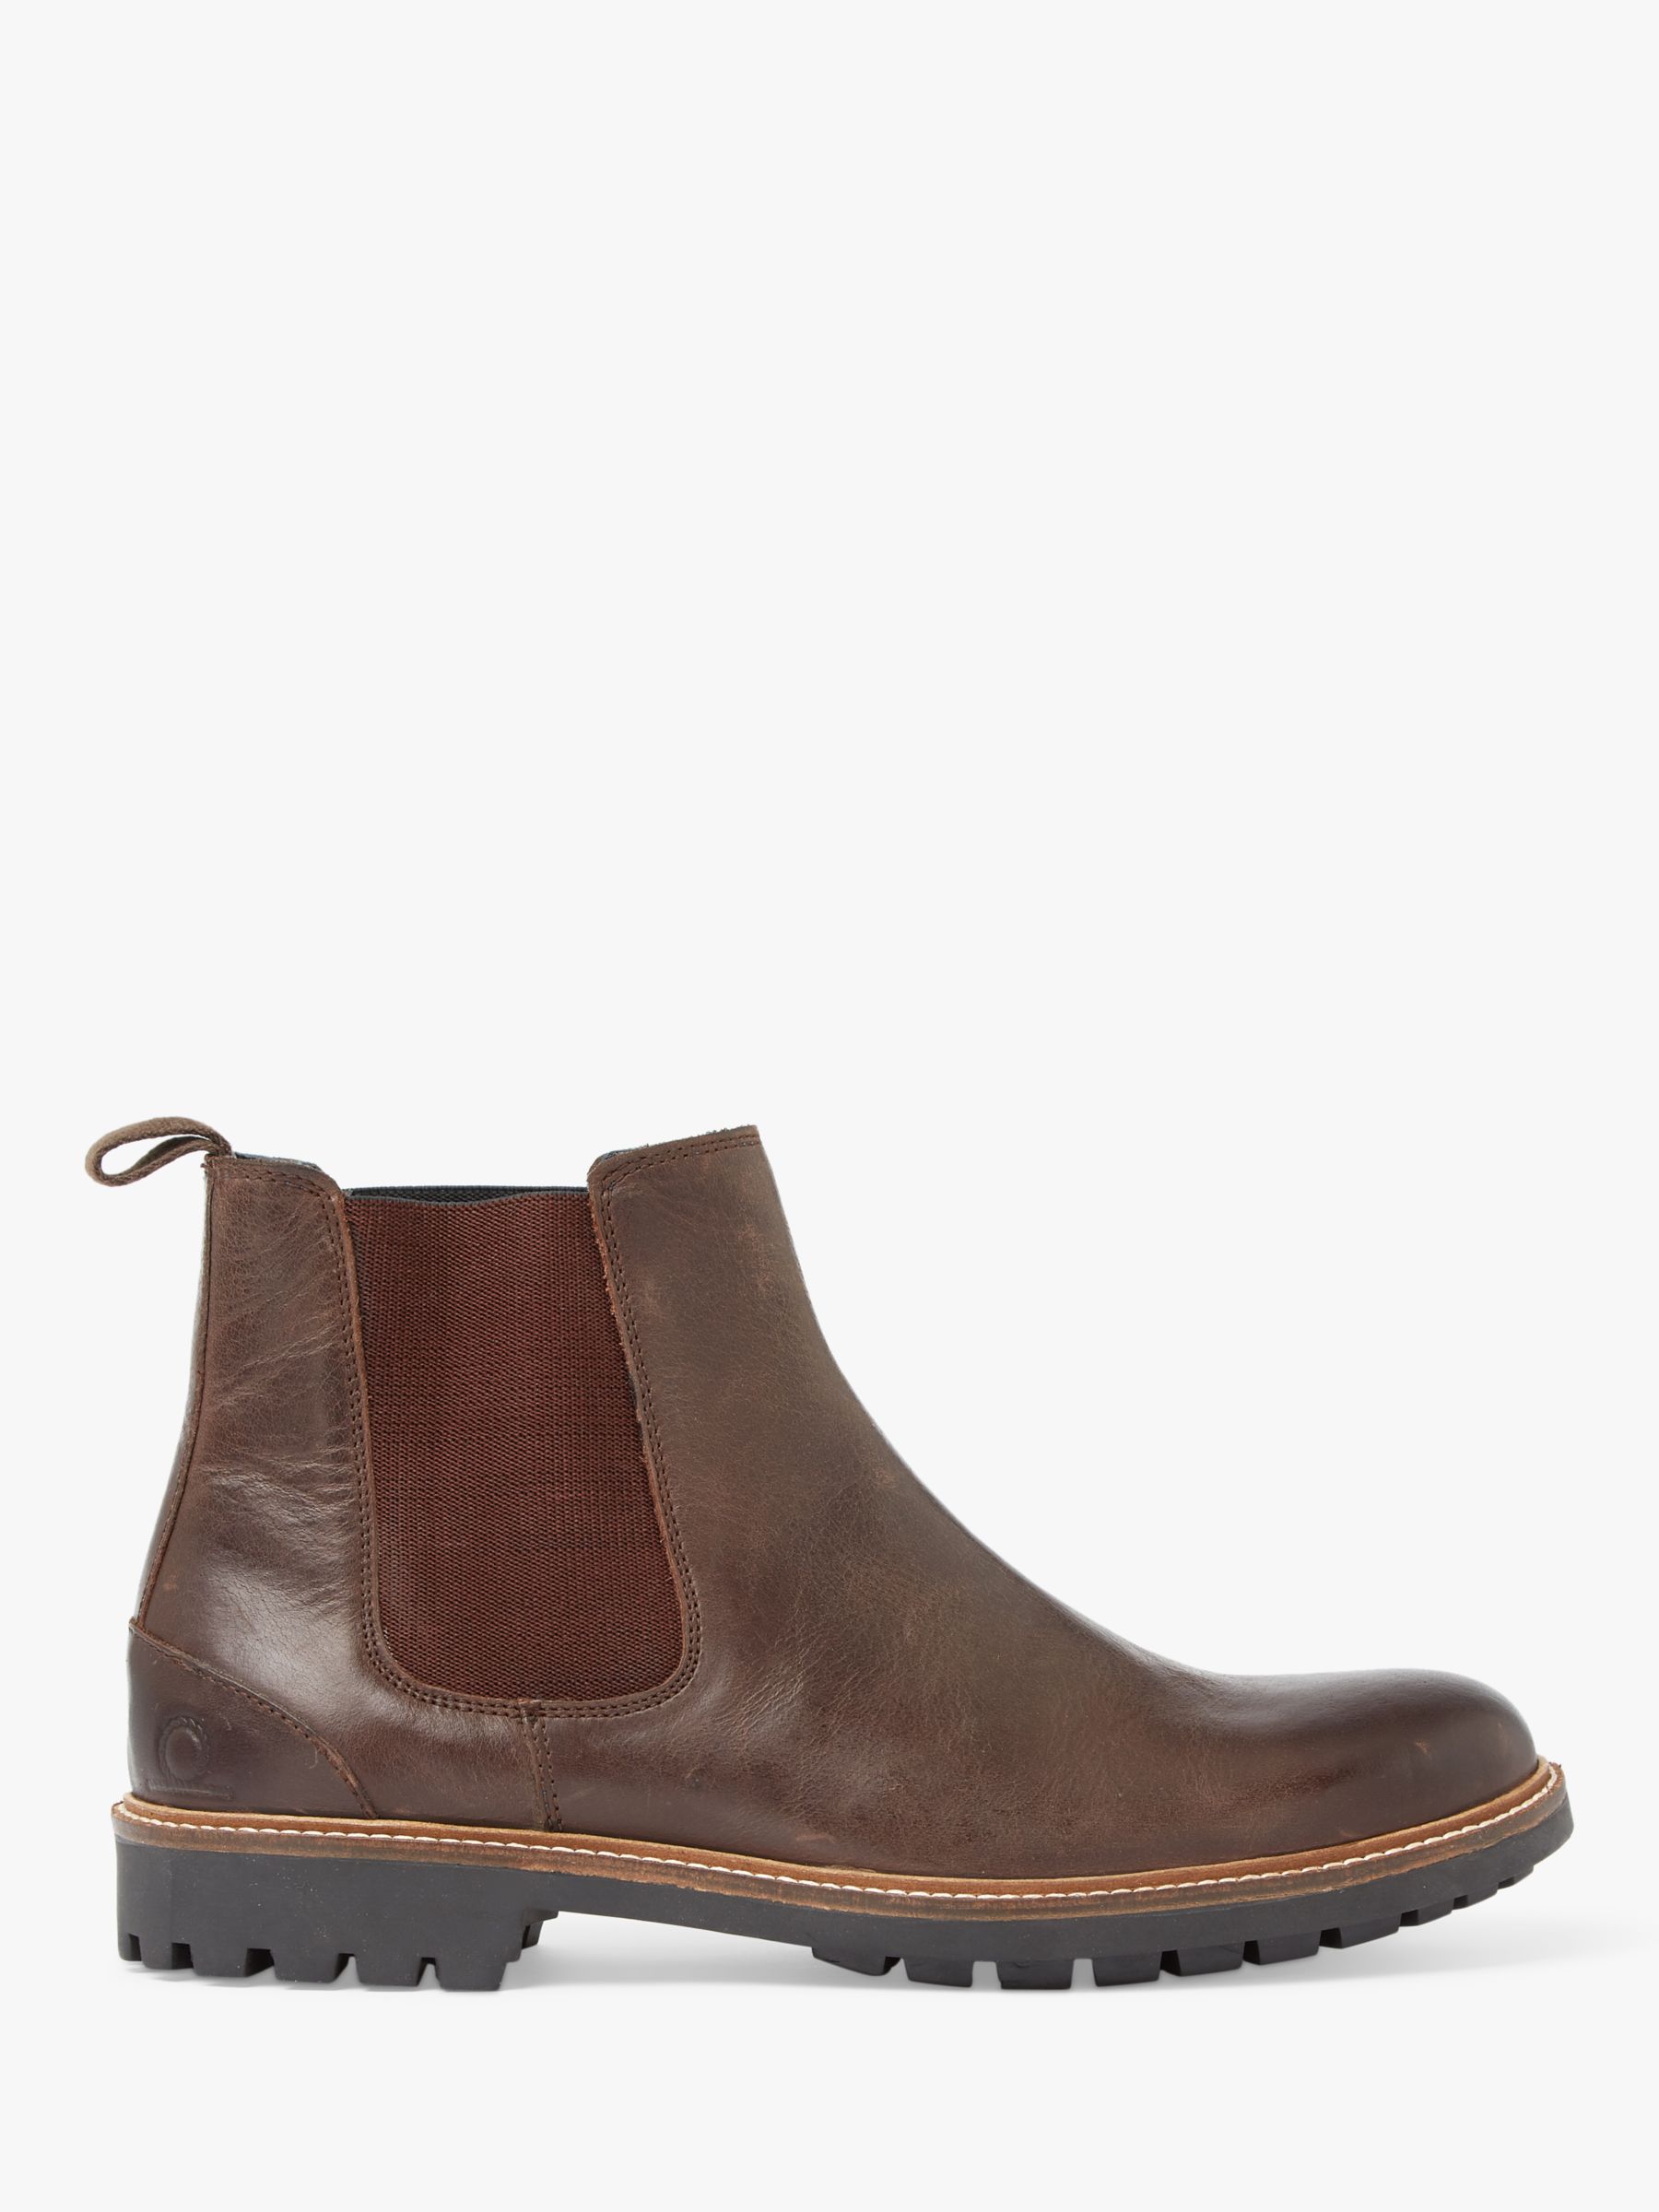 Chatham Chirk Leather Chelsea Boots, Brown at John Lewis & Partners